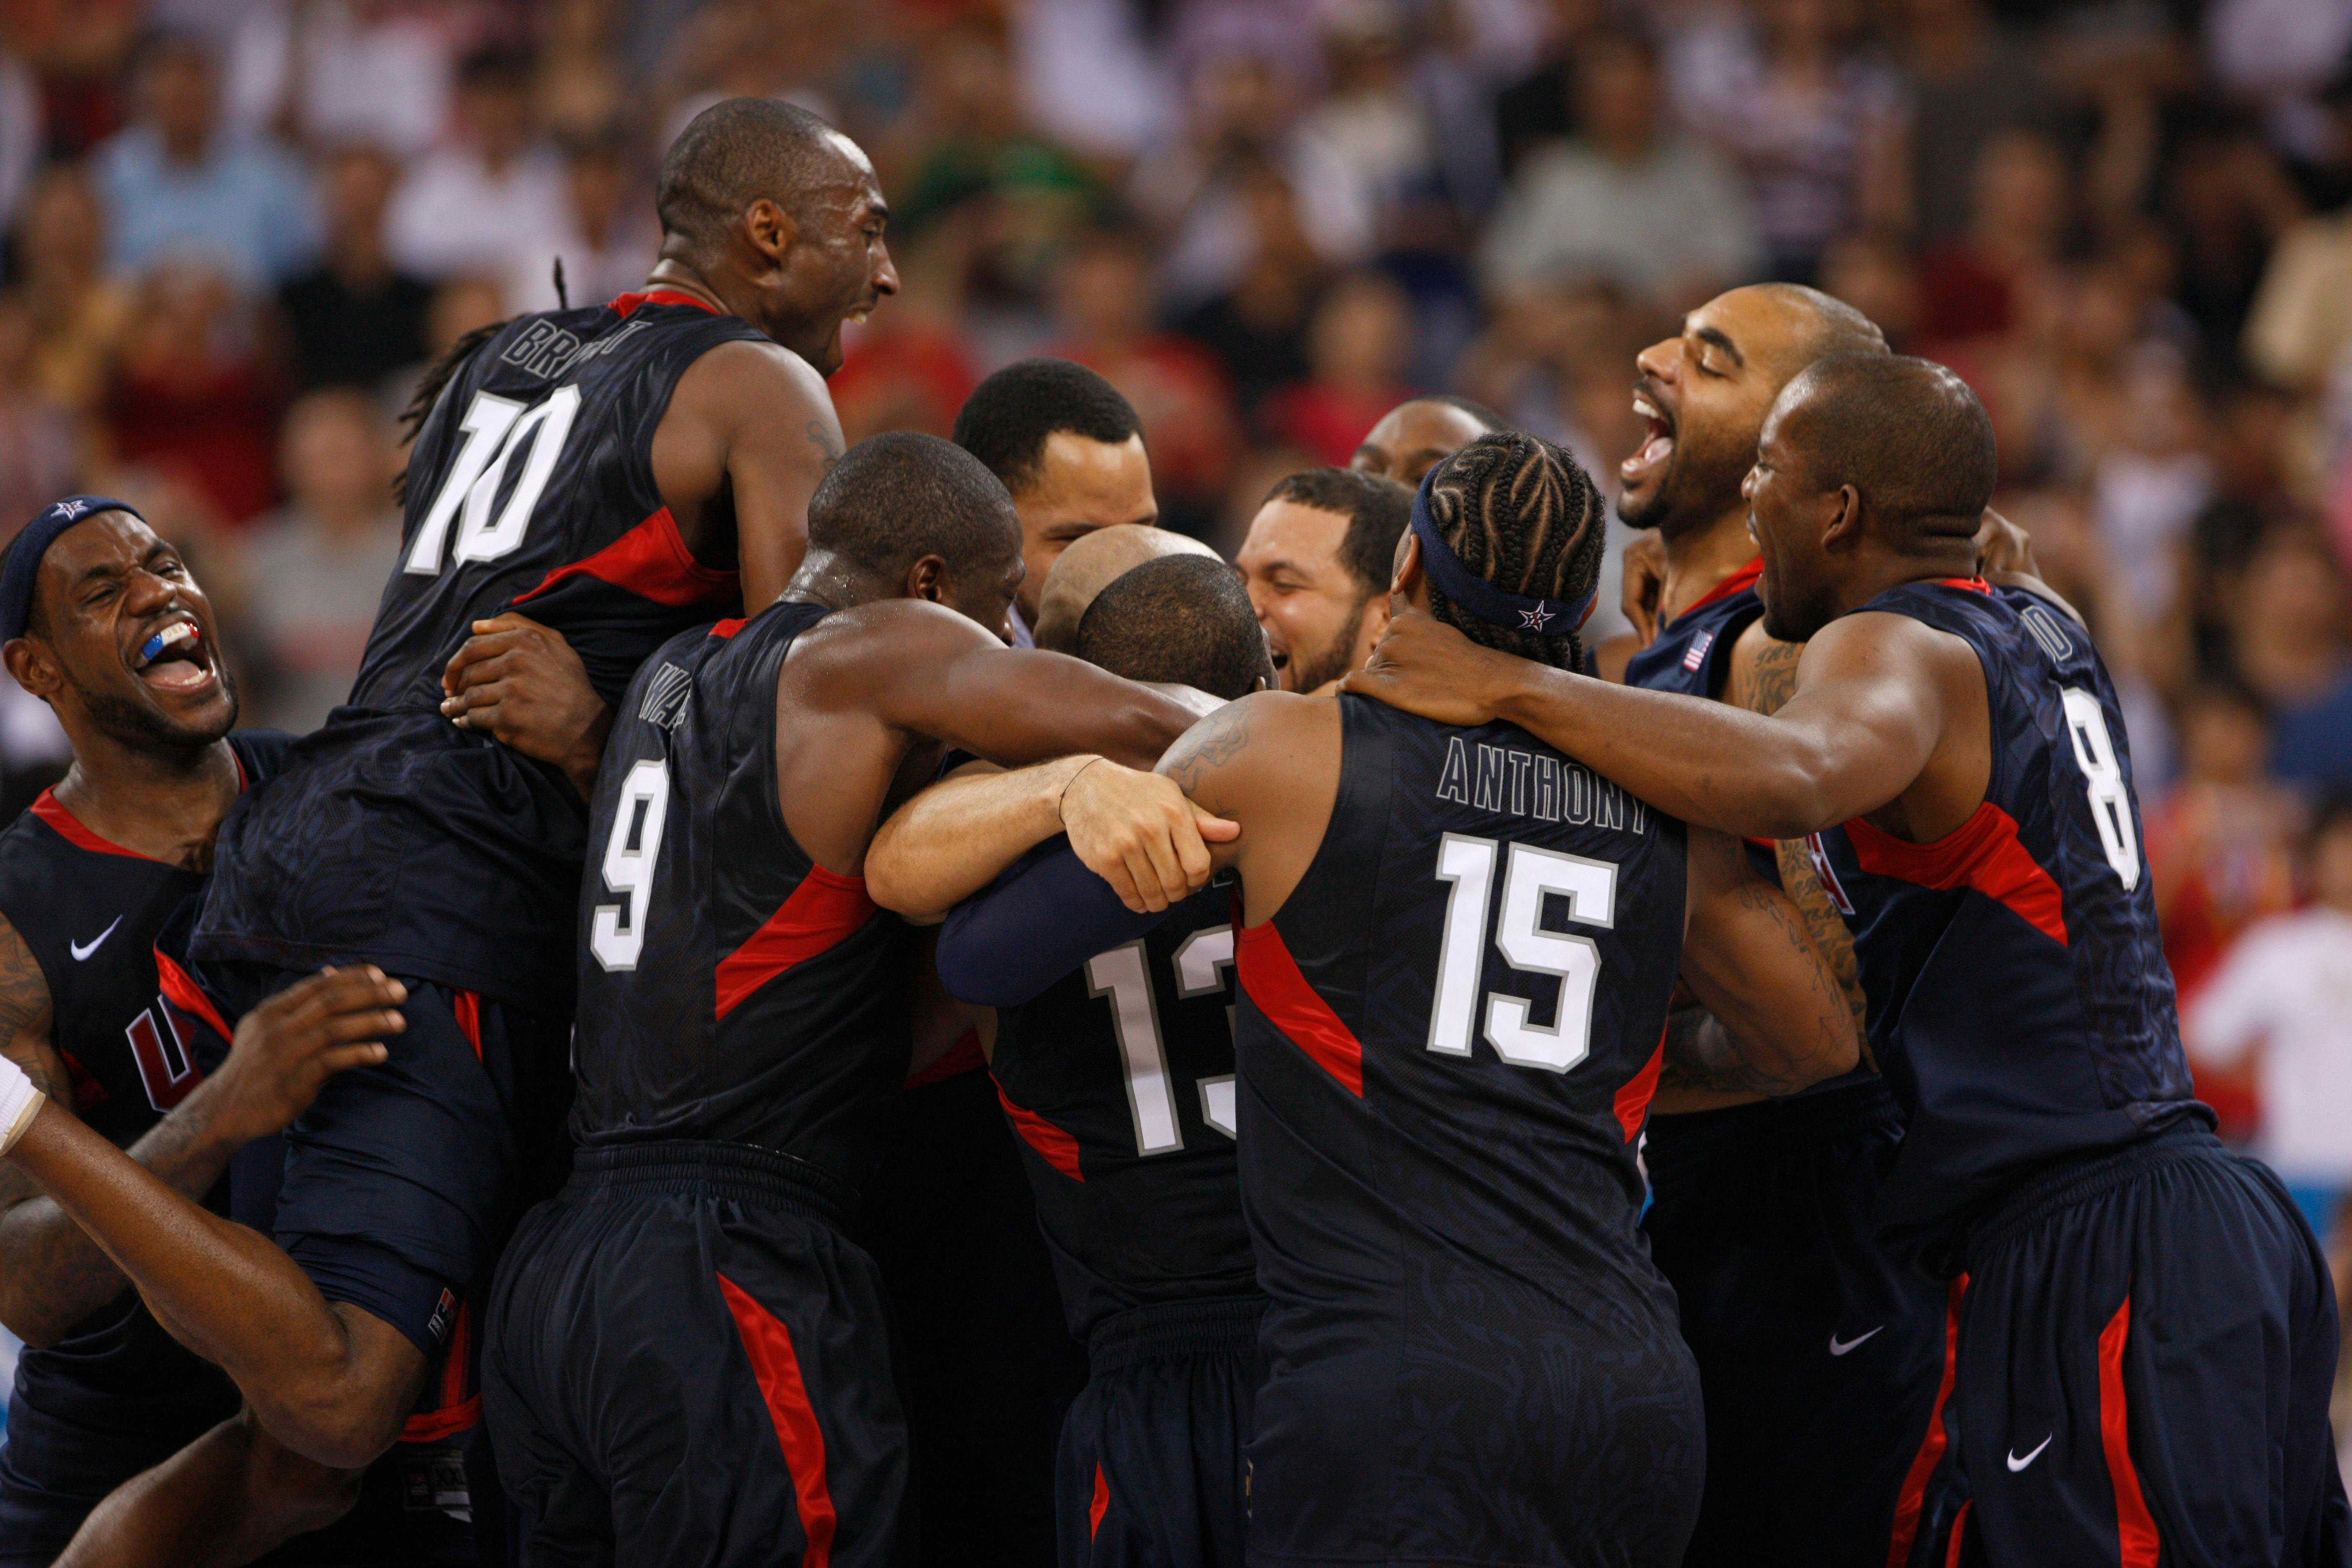 The Redeem Team hug excitedly in black and red uniforms.